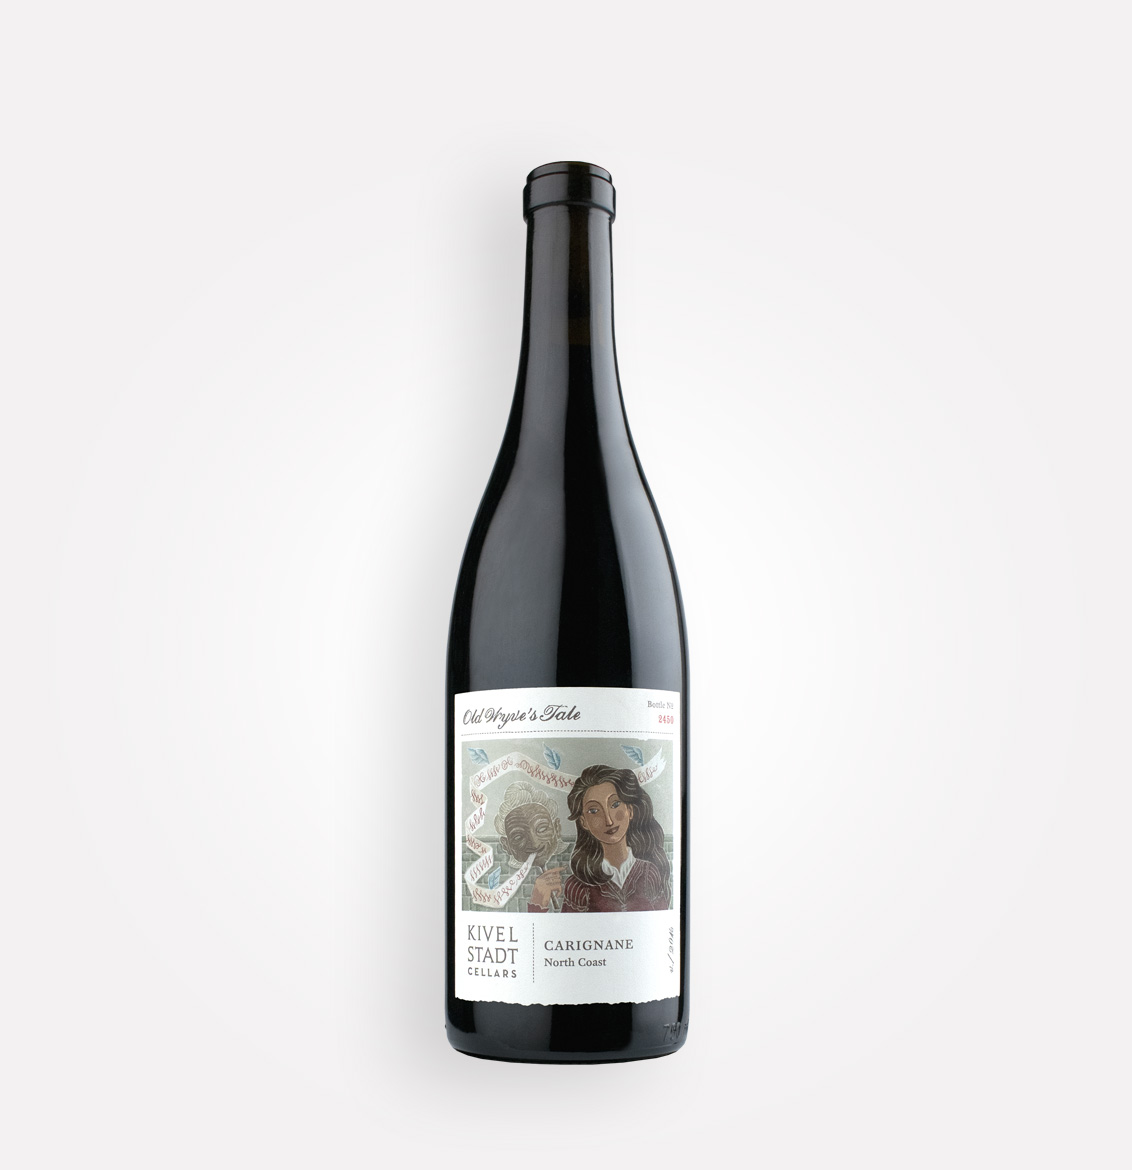 Bottle of Kivelstadt Cellars 2016 Old Wyves Tale Carignane wine from California's North Coast